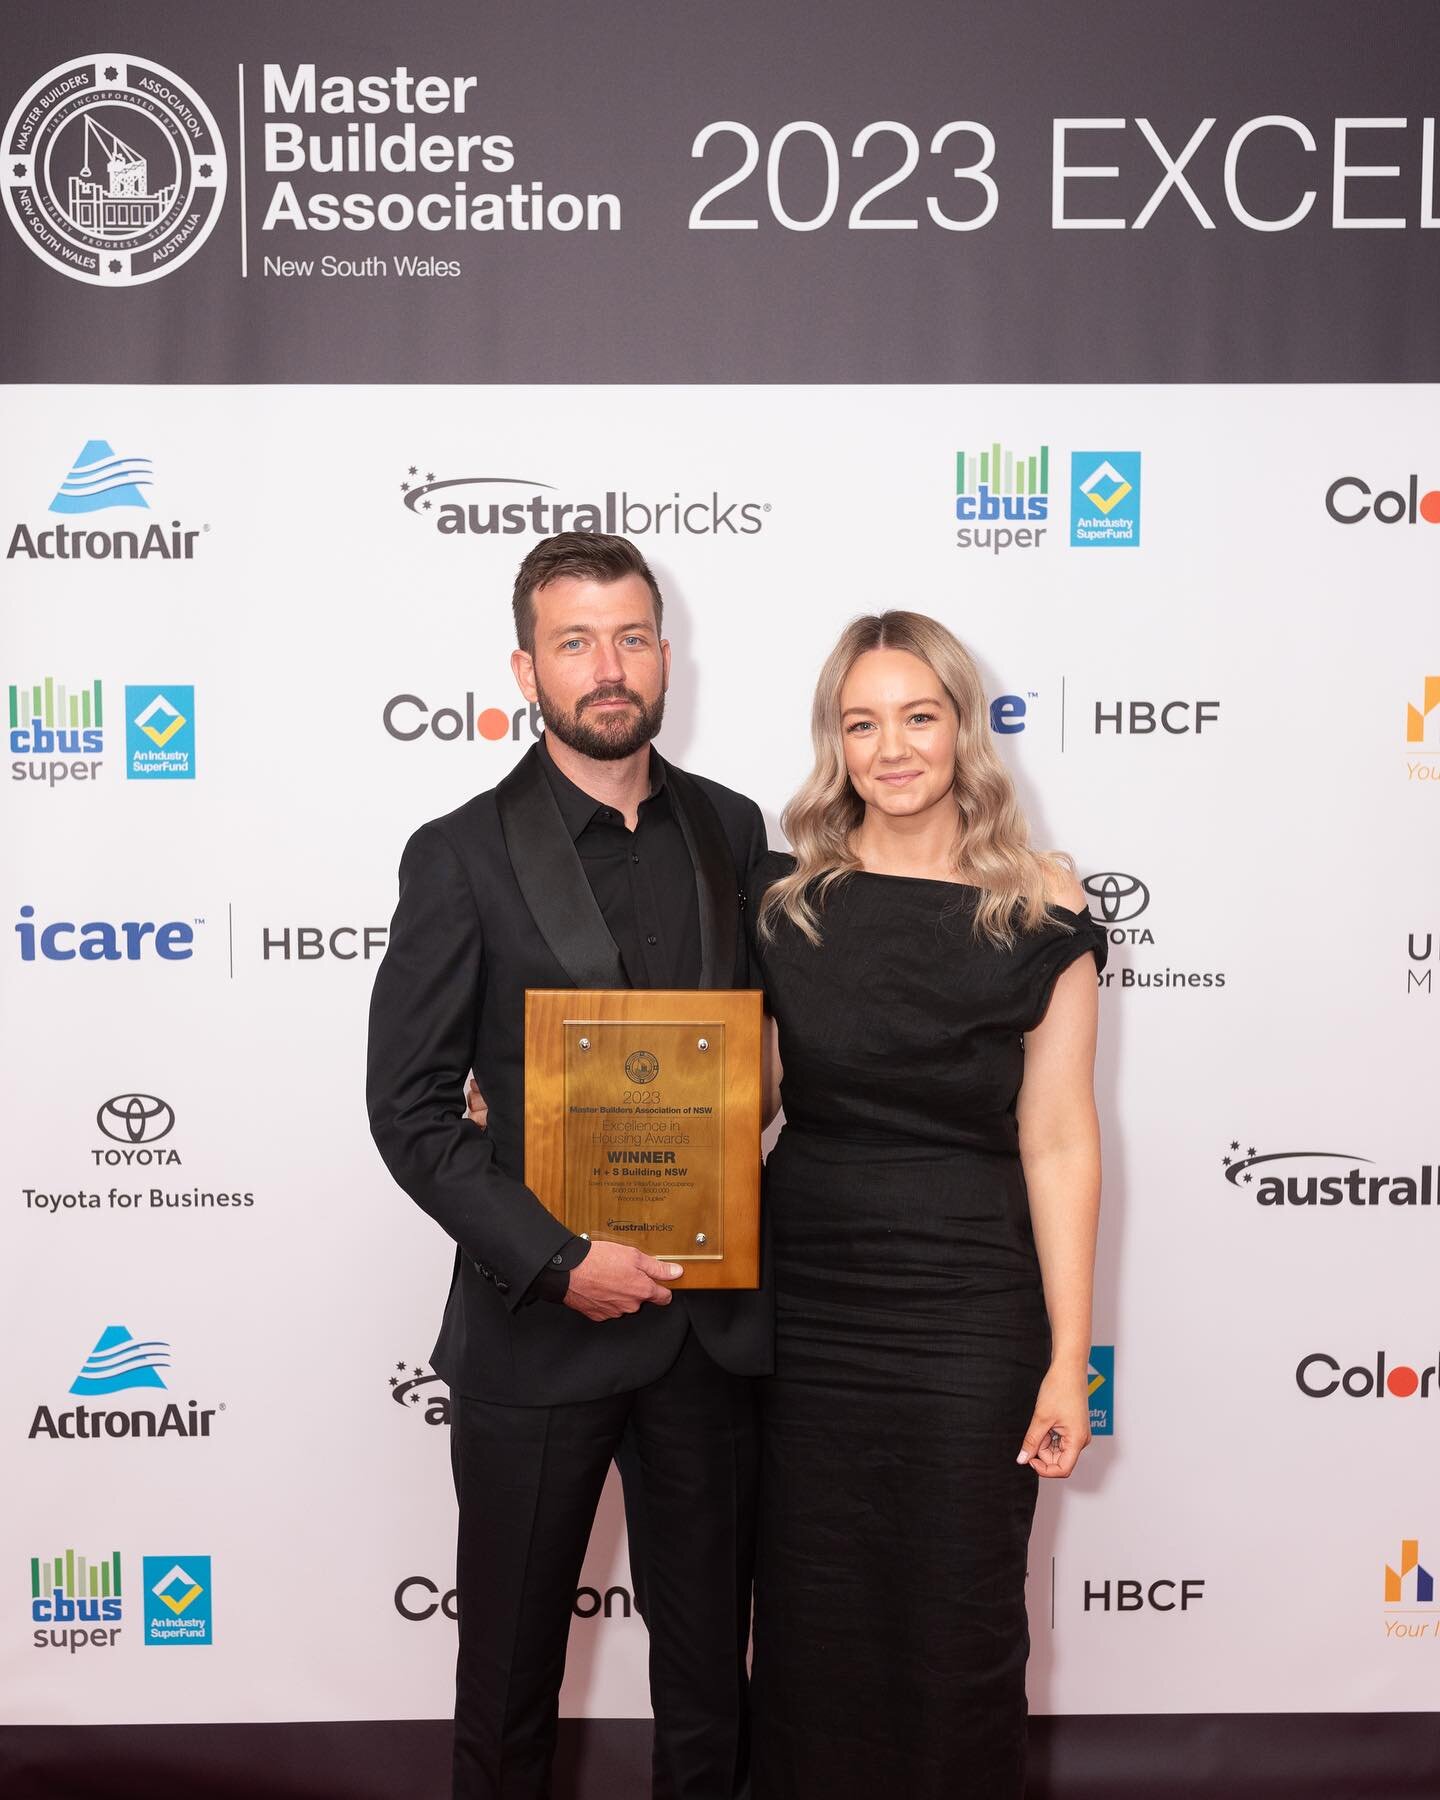 We are incredibly proud to have won an award for our Woonona Duplex Project in the Town House/ Dual Occupancy category at the @mbaawardsnsw 

This achievement would not have been possible without the hard work and dedication of our clients, team, sup